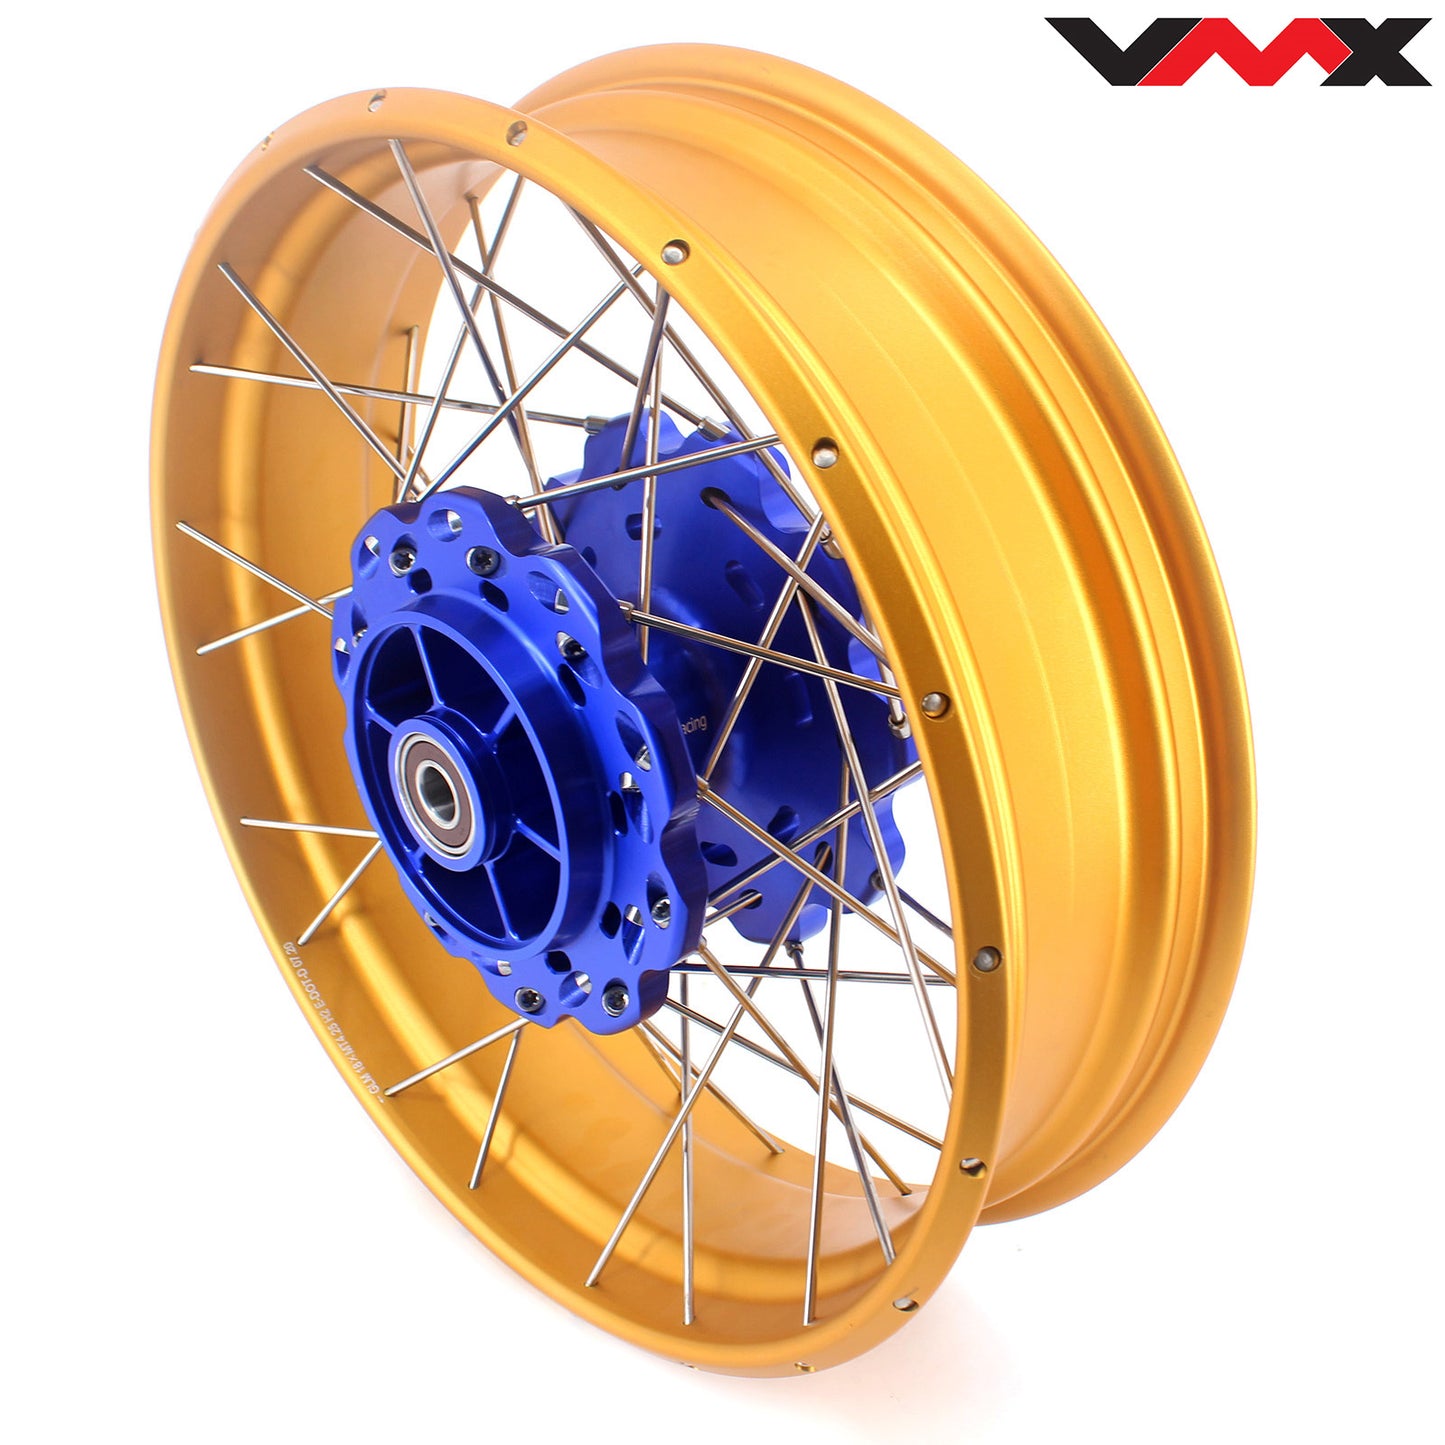 VMX 4.25*18 Inch Rear Tubeless Alloy Wheels Fit For Honda Africa Twin CRF1000L 2016-2020 CRF1100L 2021-2023